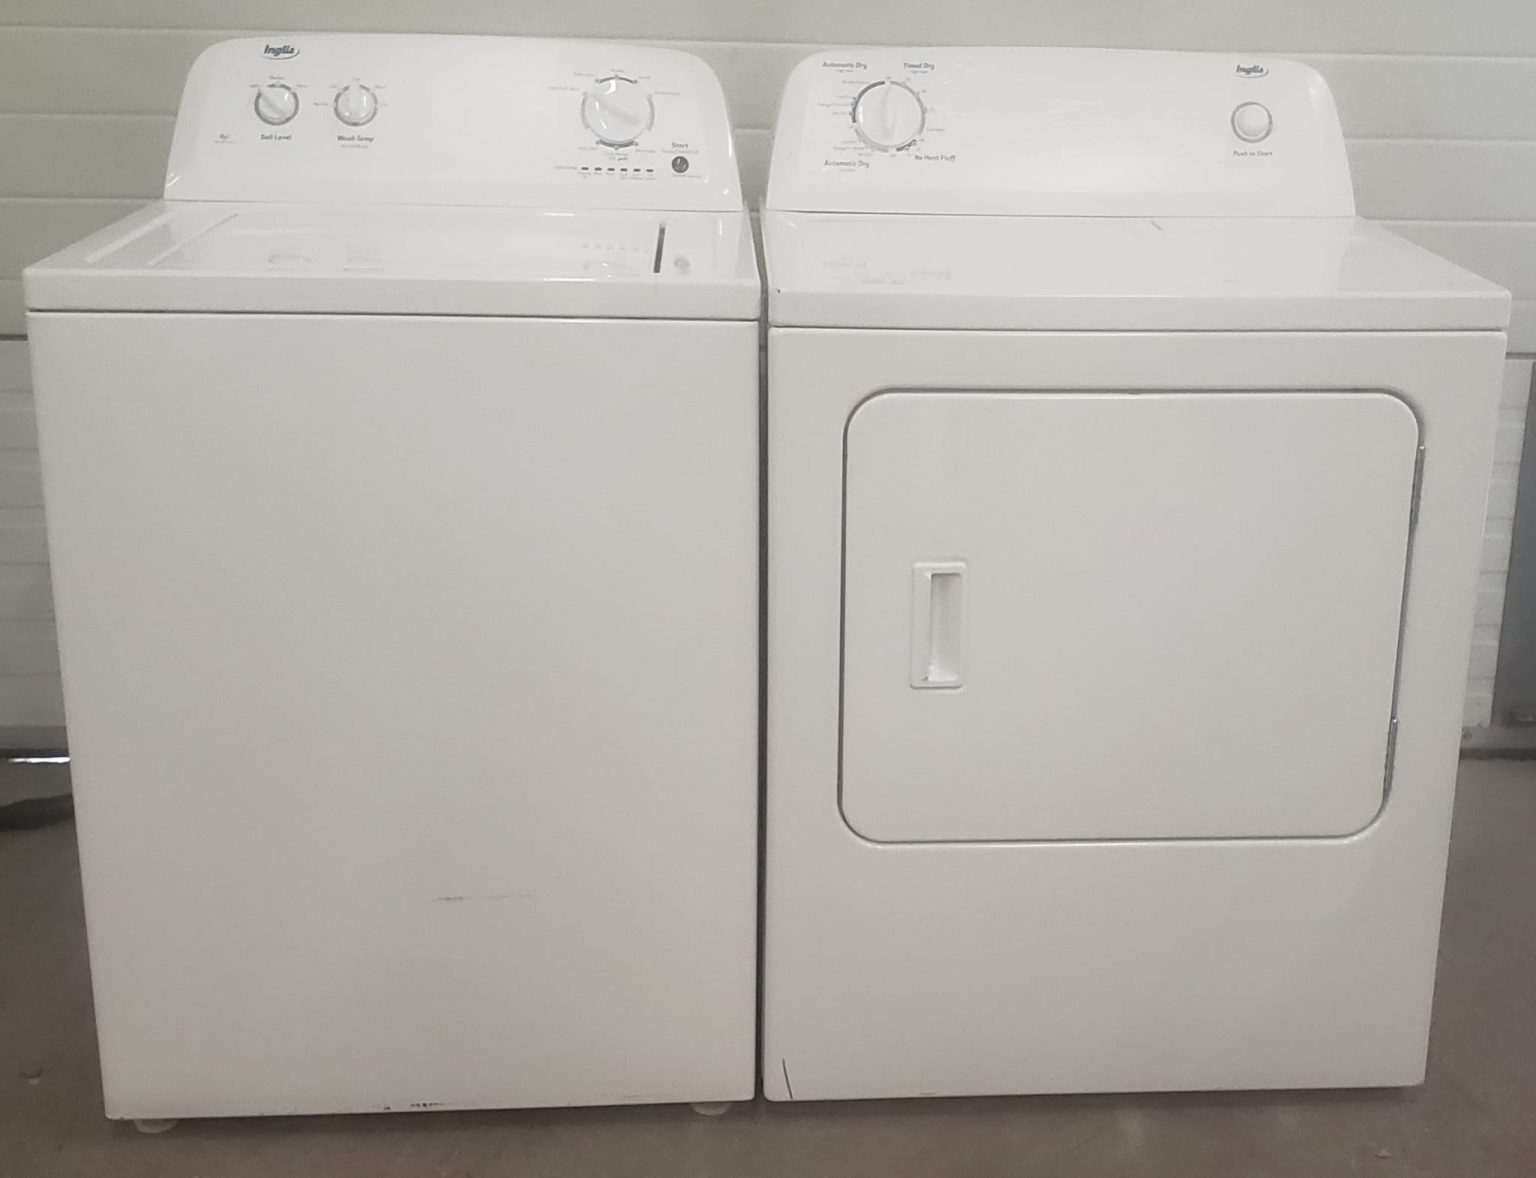 Order Your Used Set Inglis - Washer Itw4671ew0 And Dryer Yied4671ew0 Today!